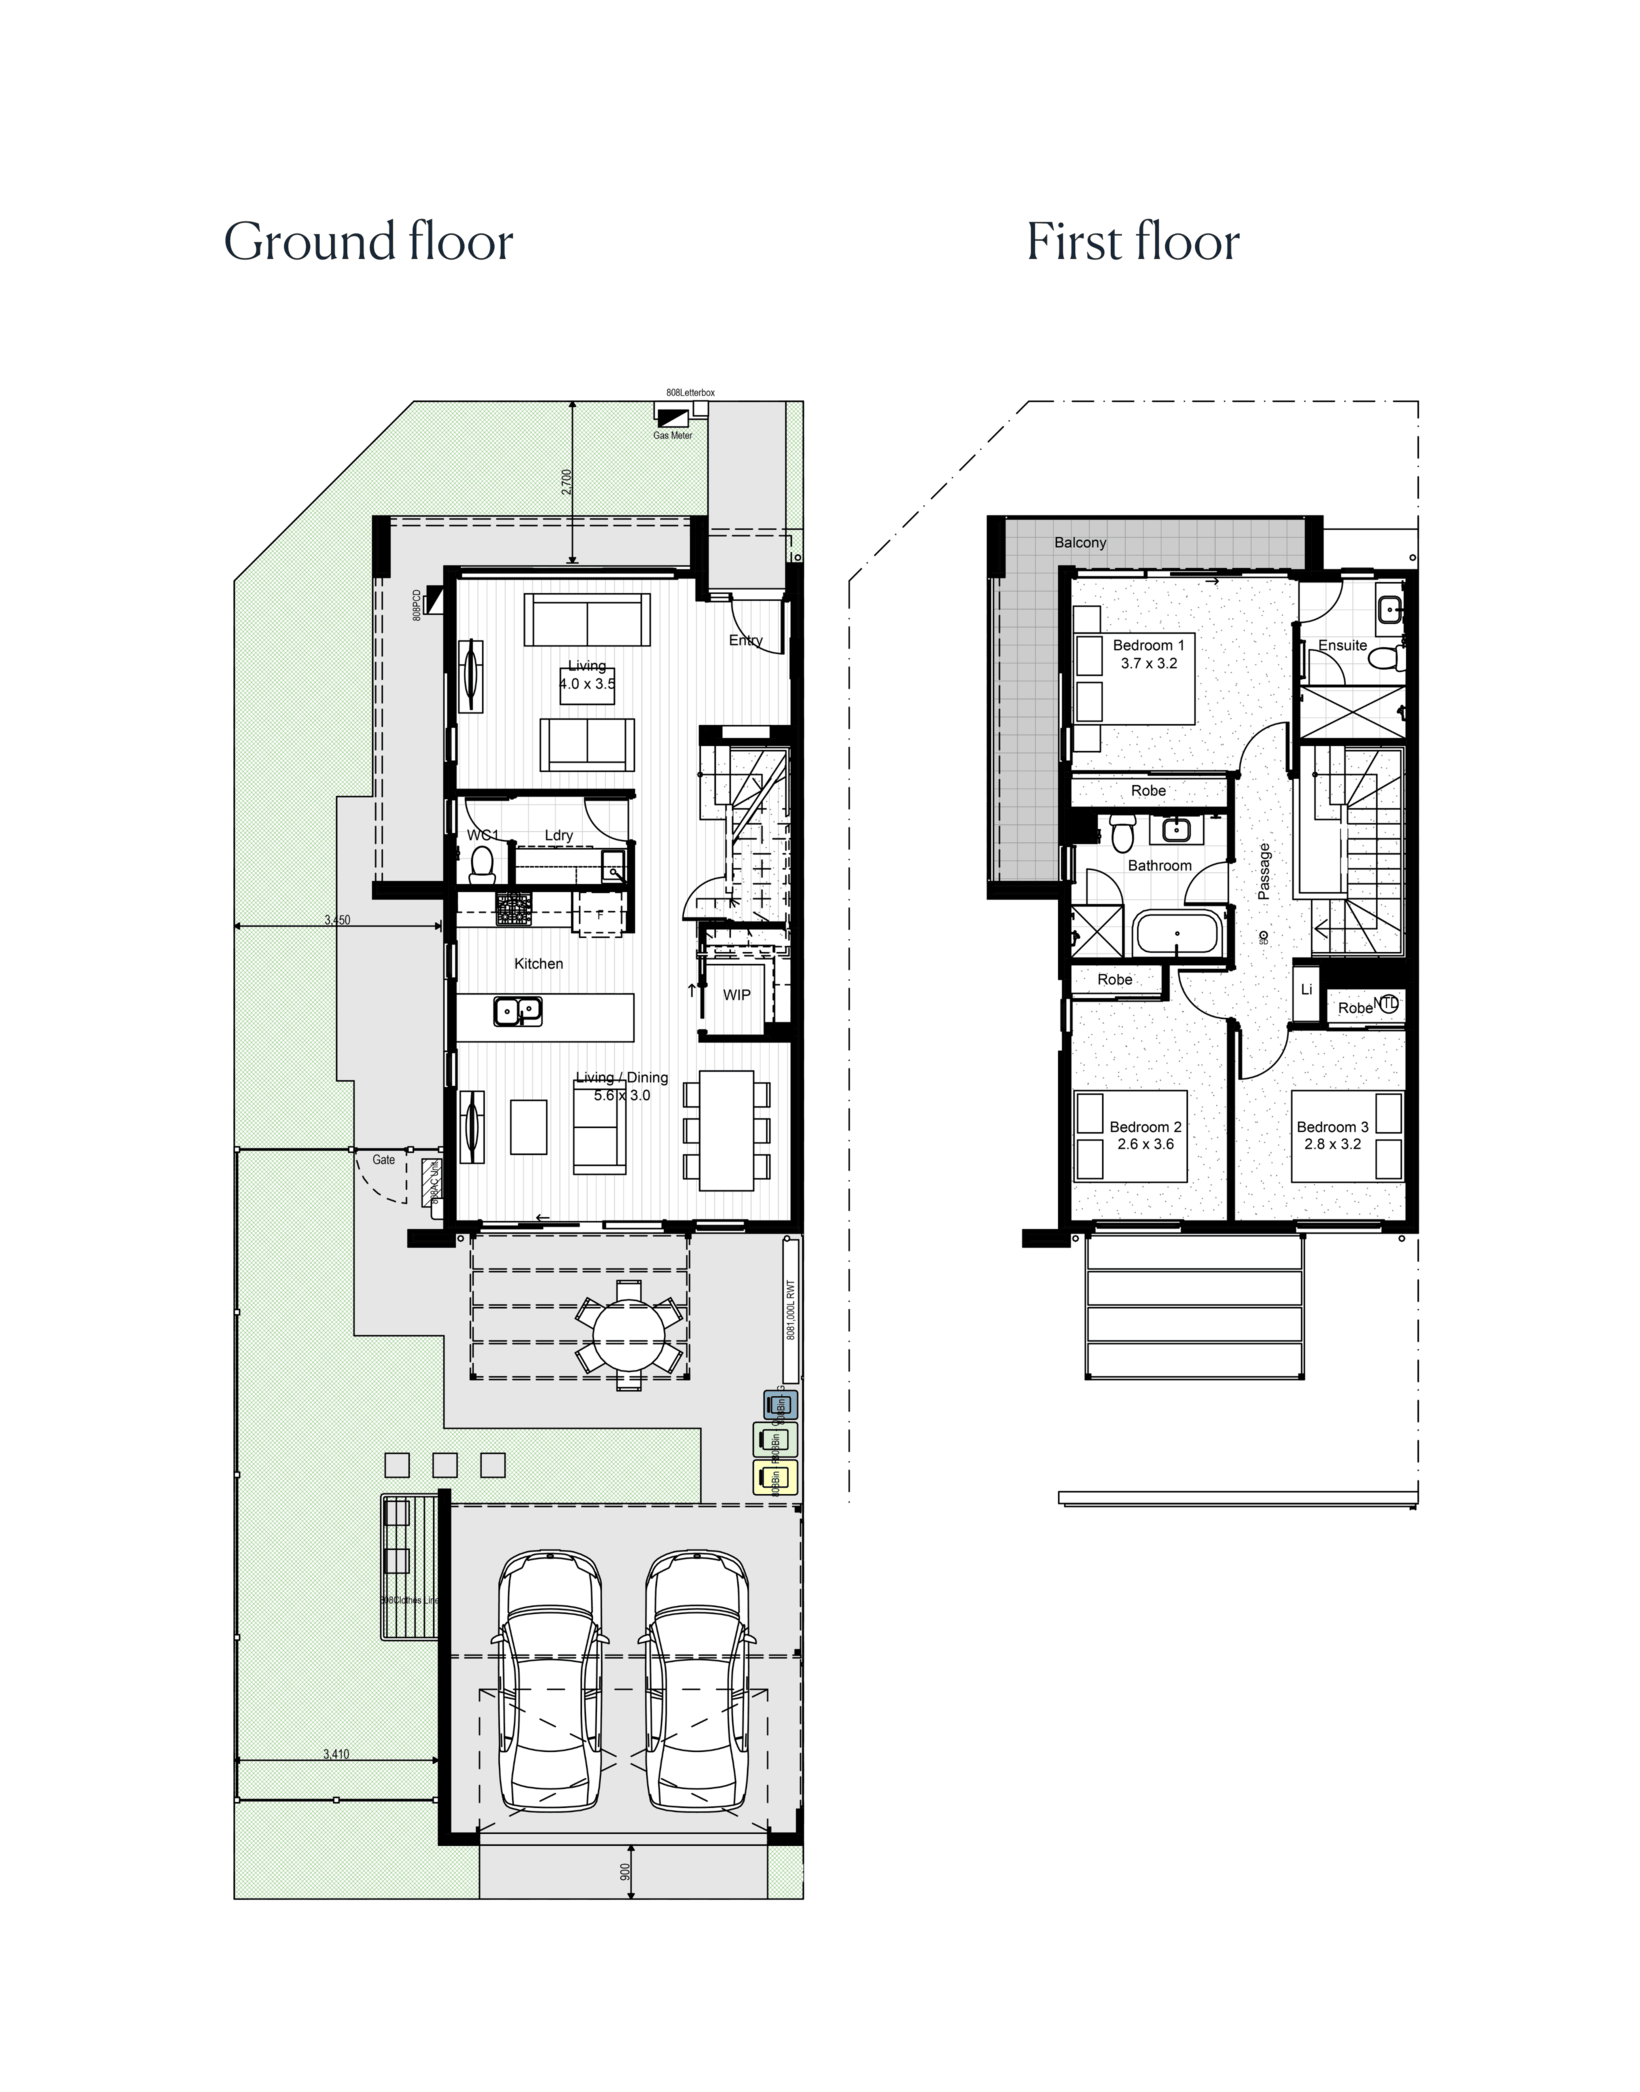 The floorplan for the Option 3 townhome at Riverlea.